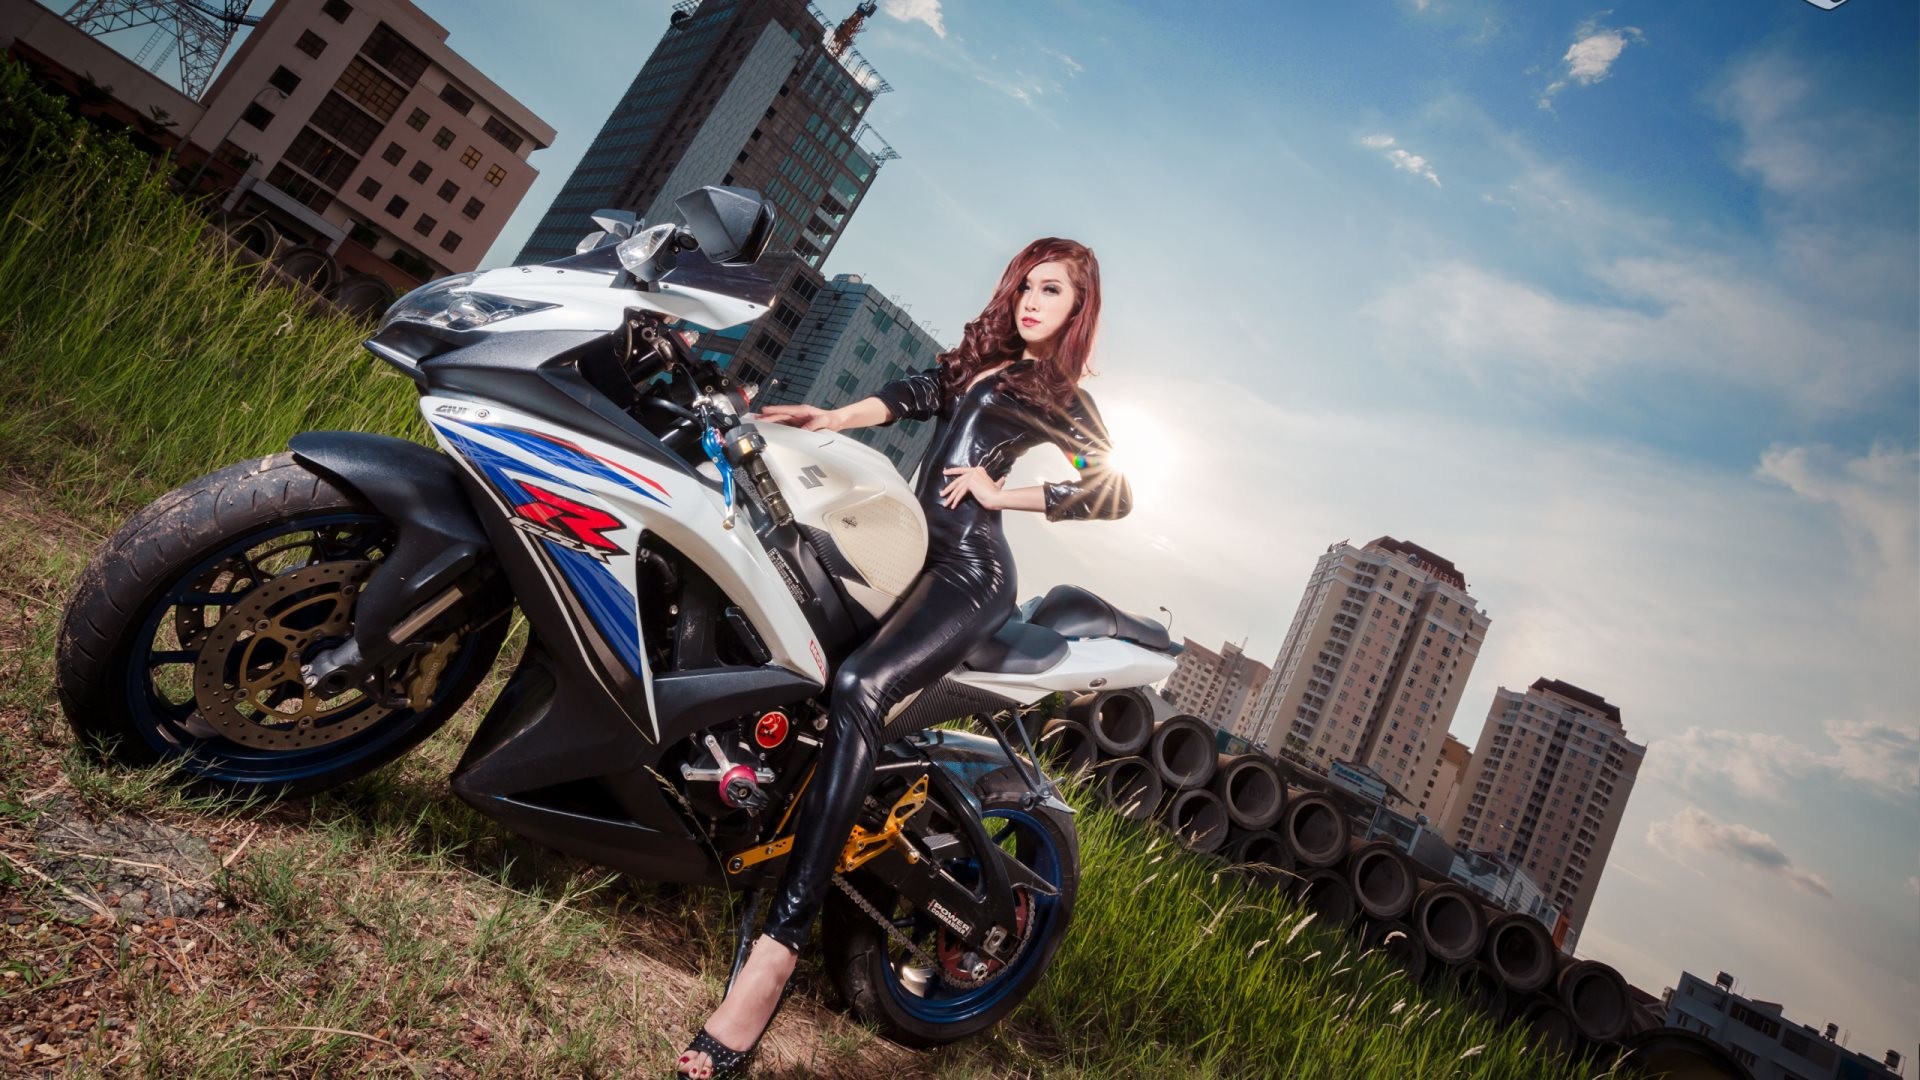 HD Wallpaper Super girl and super motorcycle